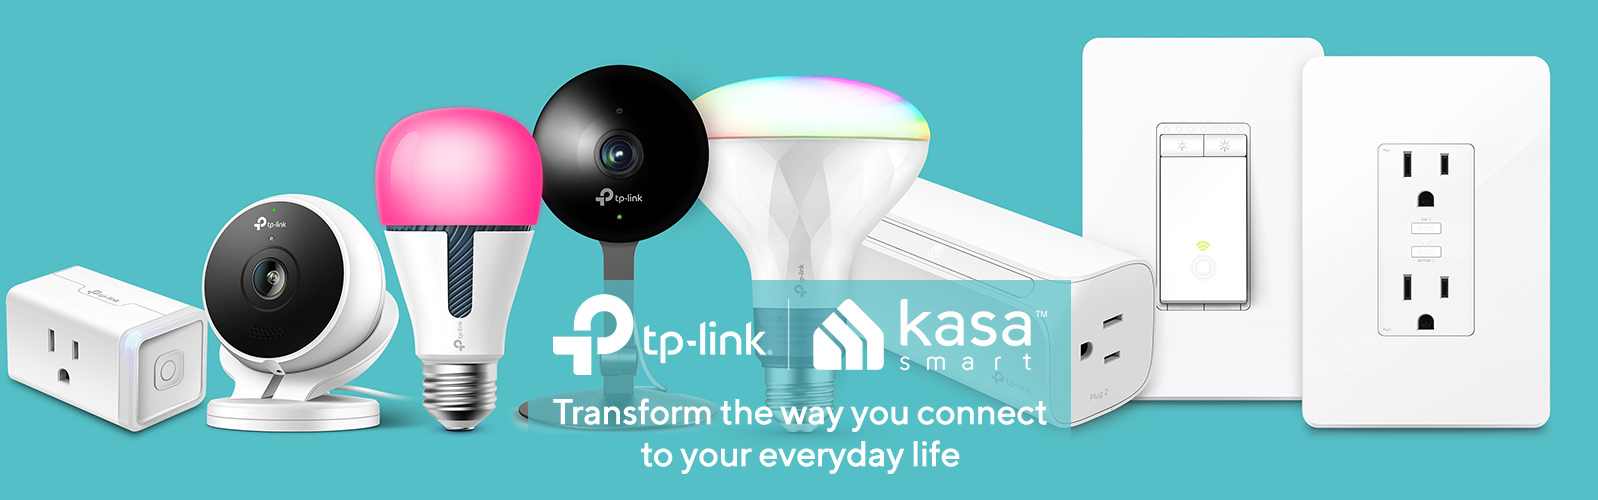 TP-Link — Transform the way you connect to your everyday life